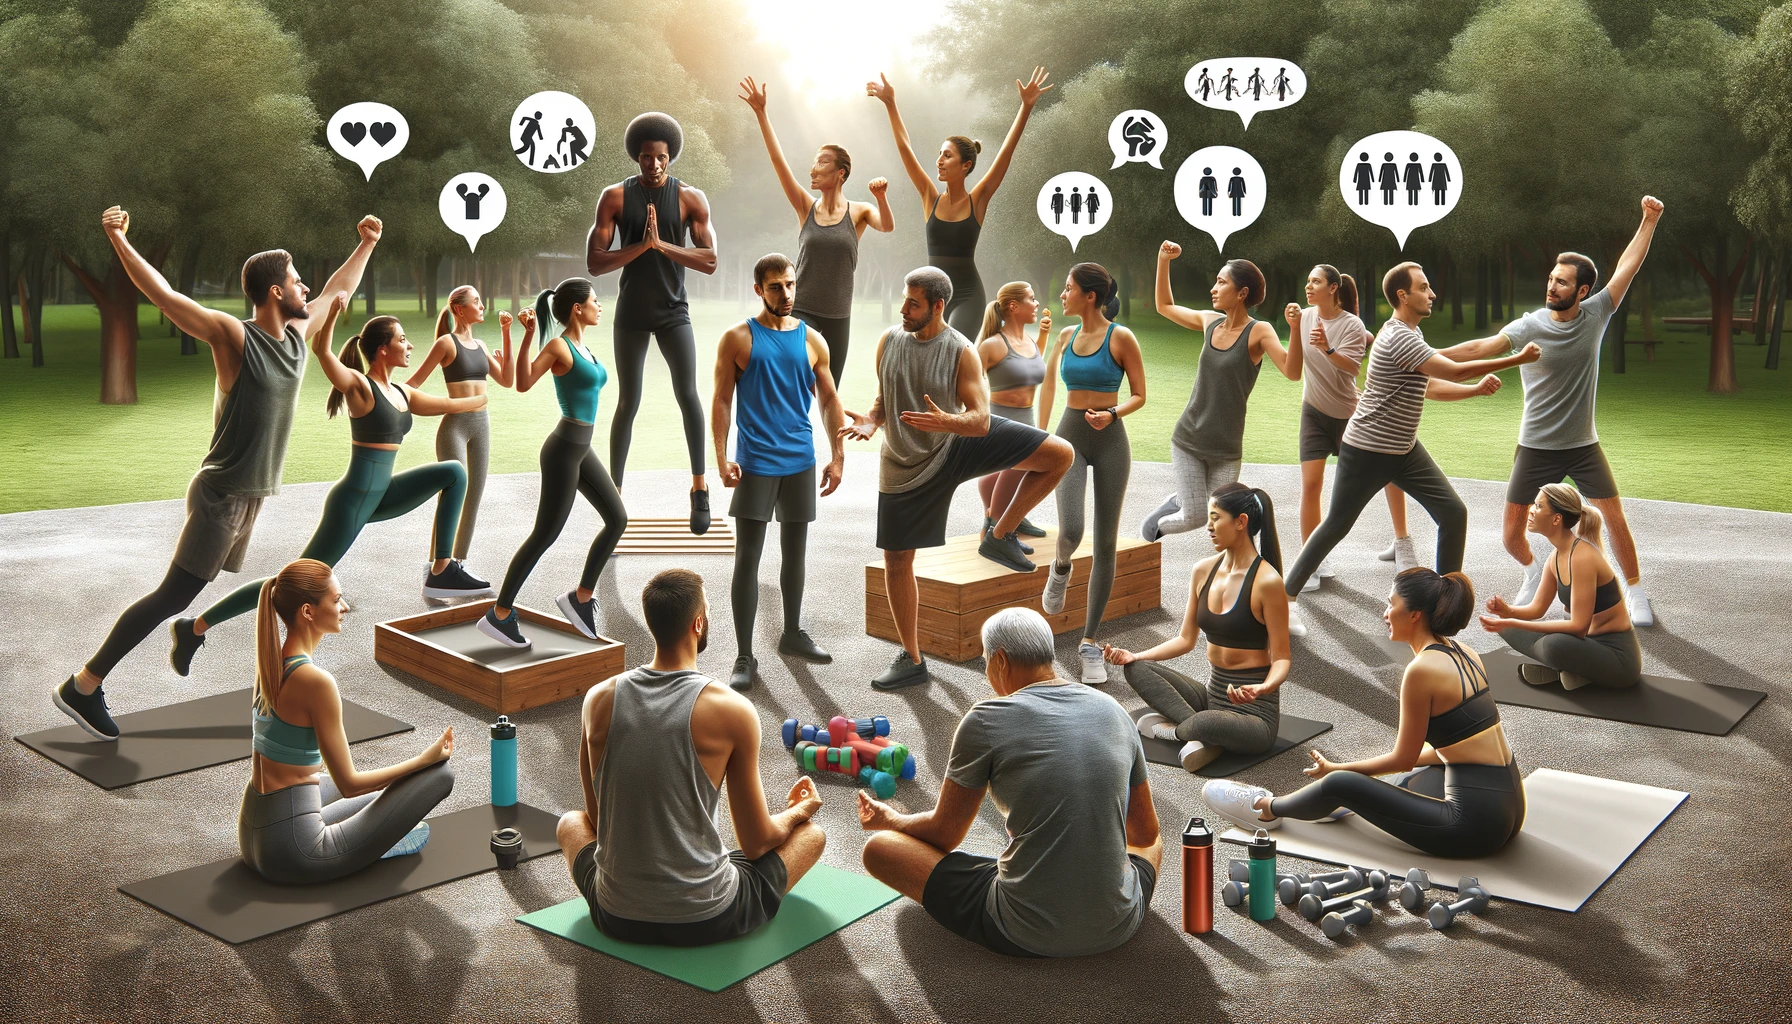 How Do Group Workouts Foster Community?